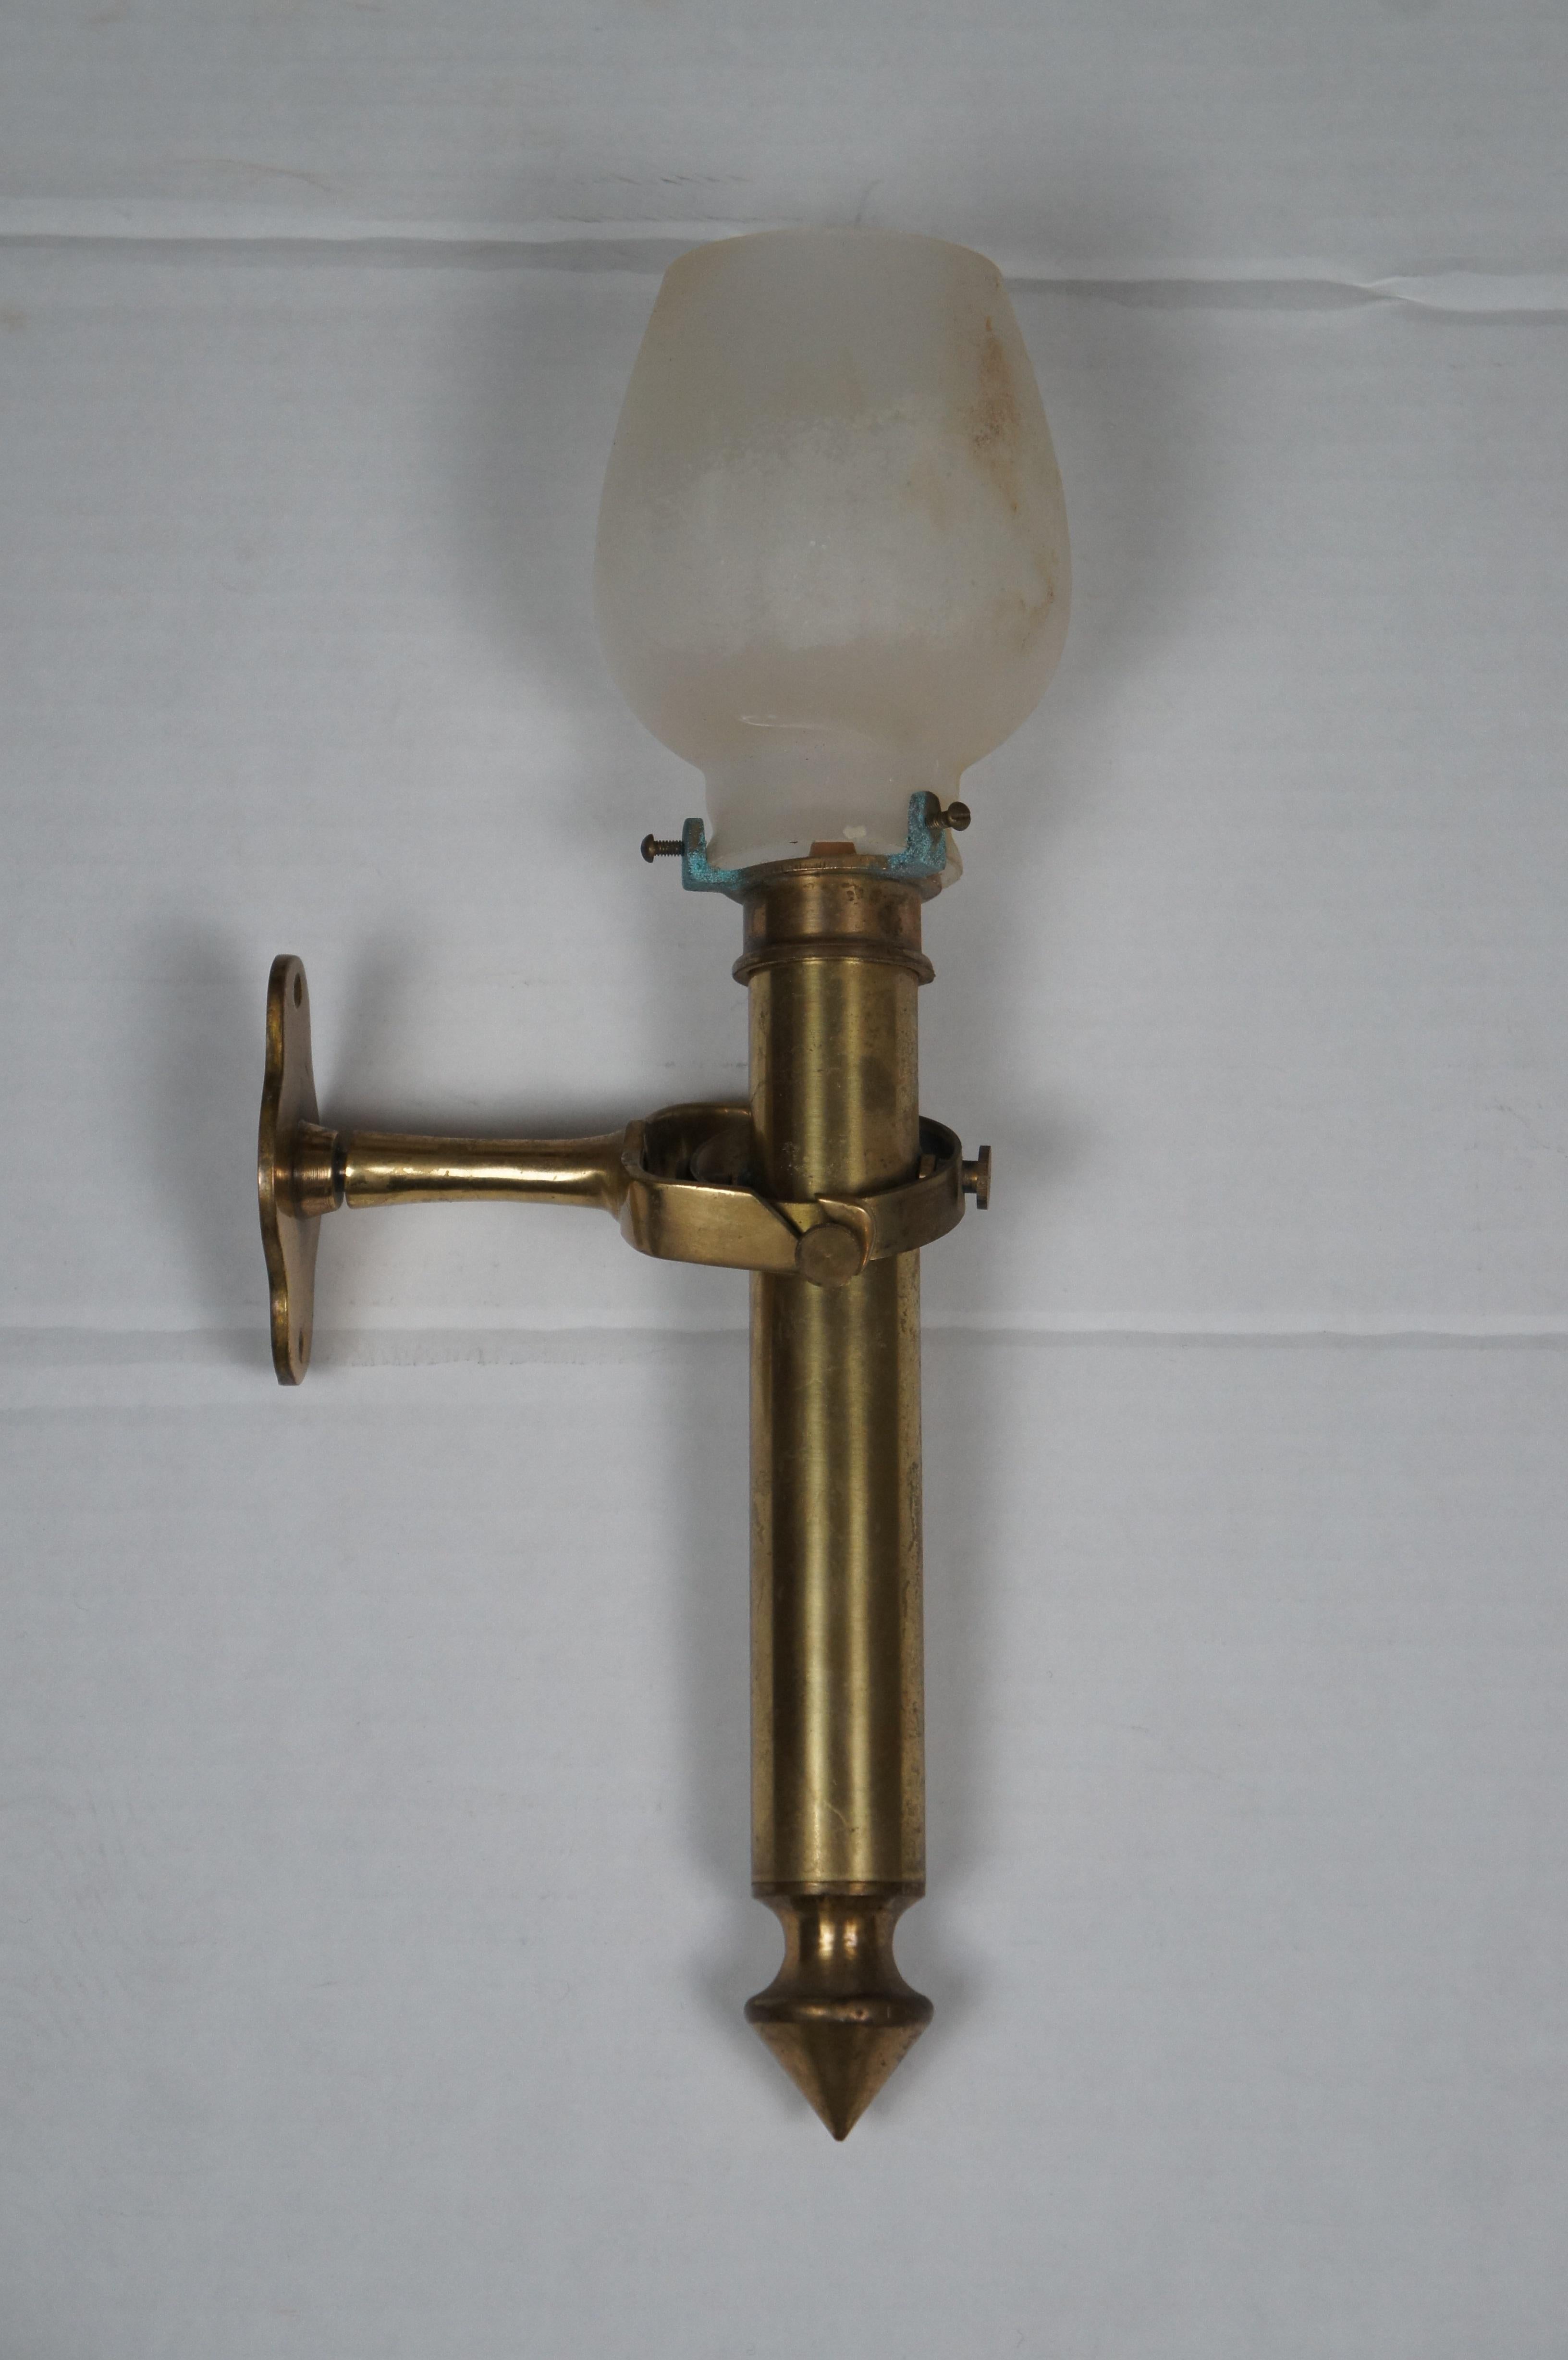 2 Antique Nautical Marine Brass Gimbal Swivel Hurricane Candle Holder Sconces  In Good Condition For Sale In Dayton, OH